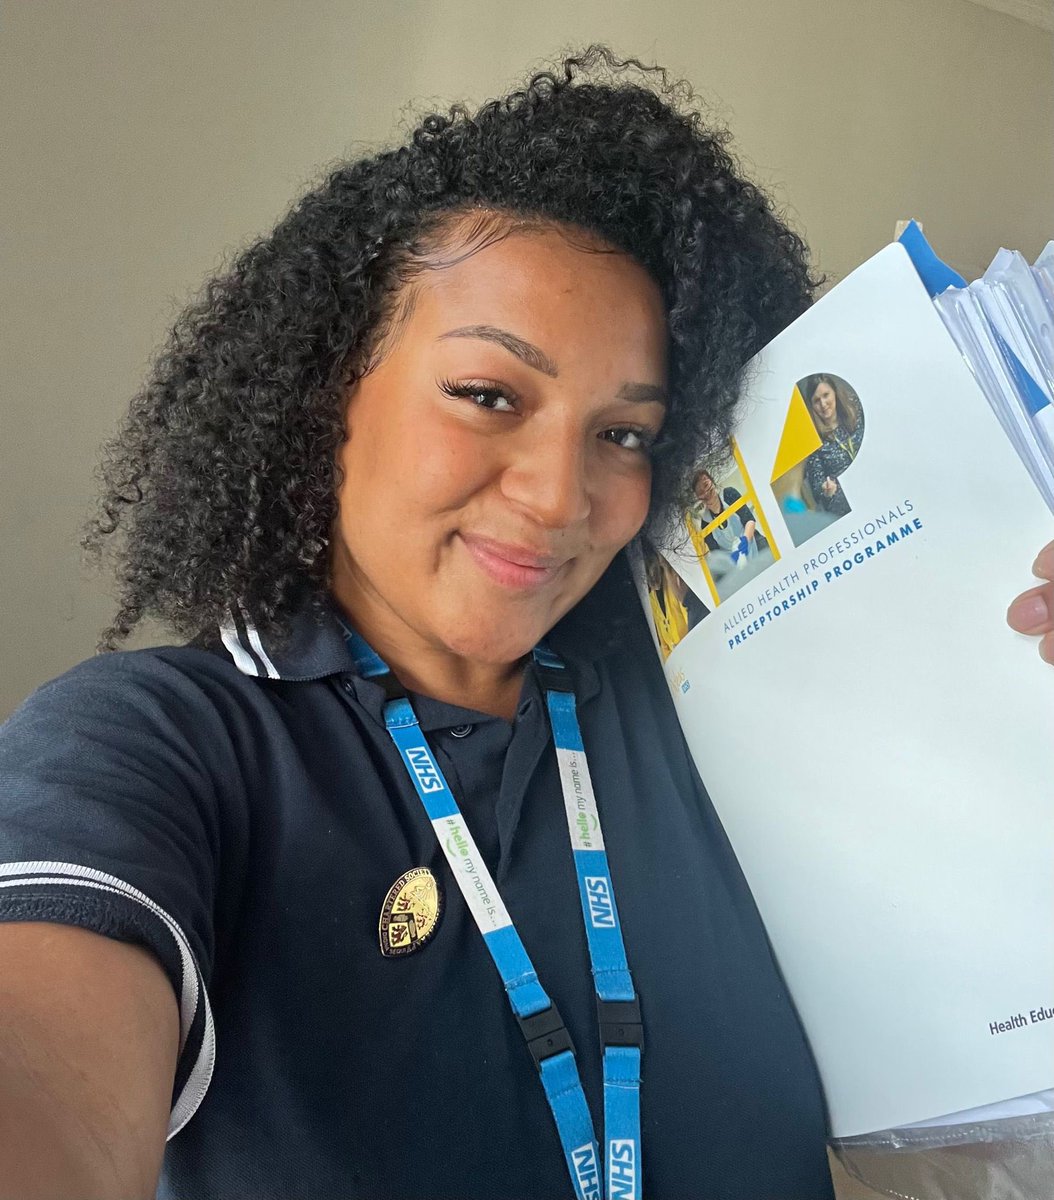 HUGE congrats to Jazmin, Physio at @BEHMHTNHS completed Preceptorship ✅she well & truly utilised Preceptorship to its absolute fullest 🌟her words ‘I’m honestly so proud of this portfolio’ - she reflects on how she valued Preceptorship as a constant throughout her rotations ✨🎉